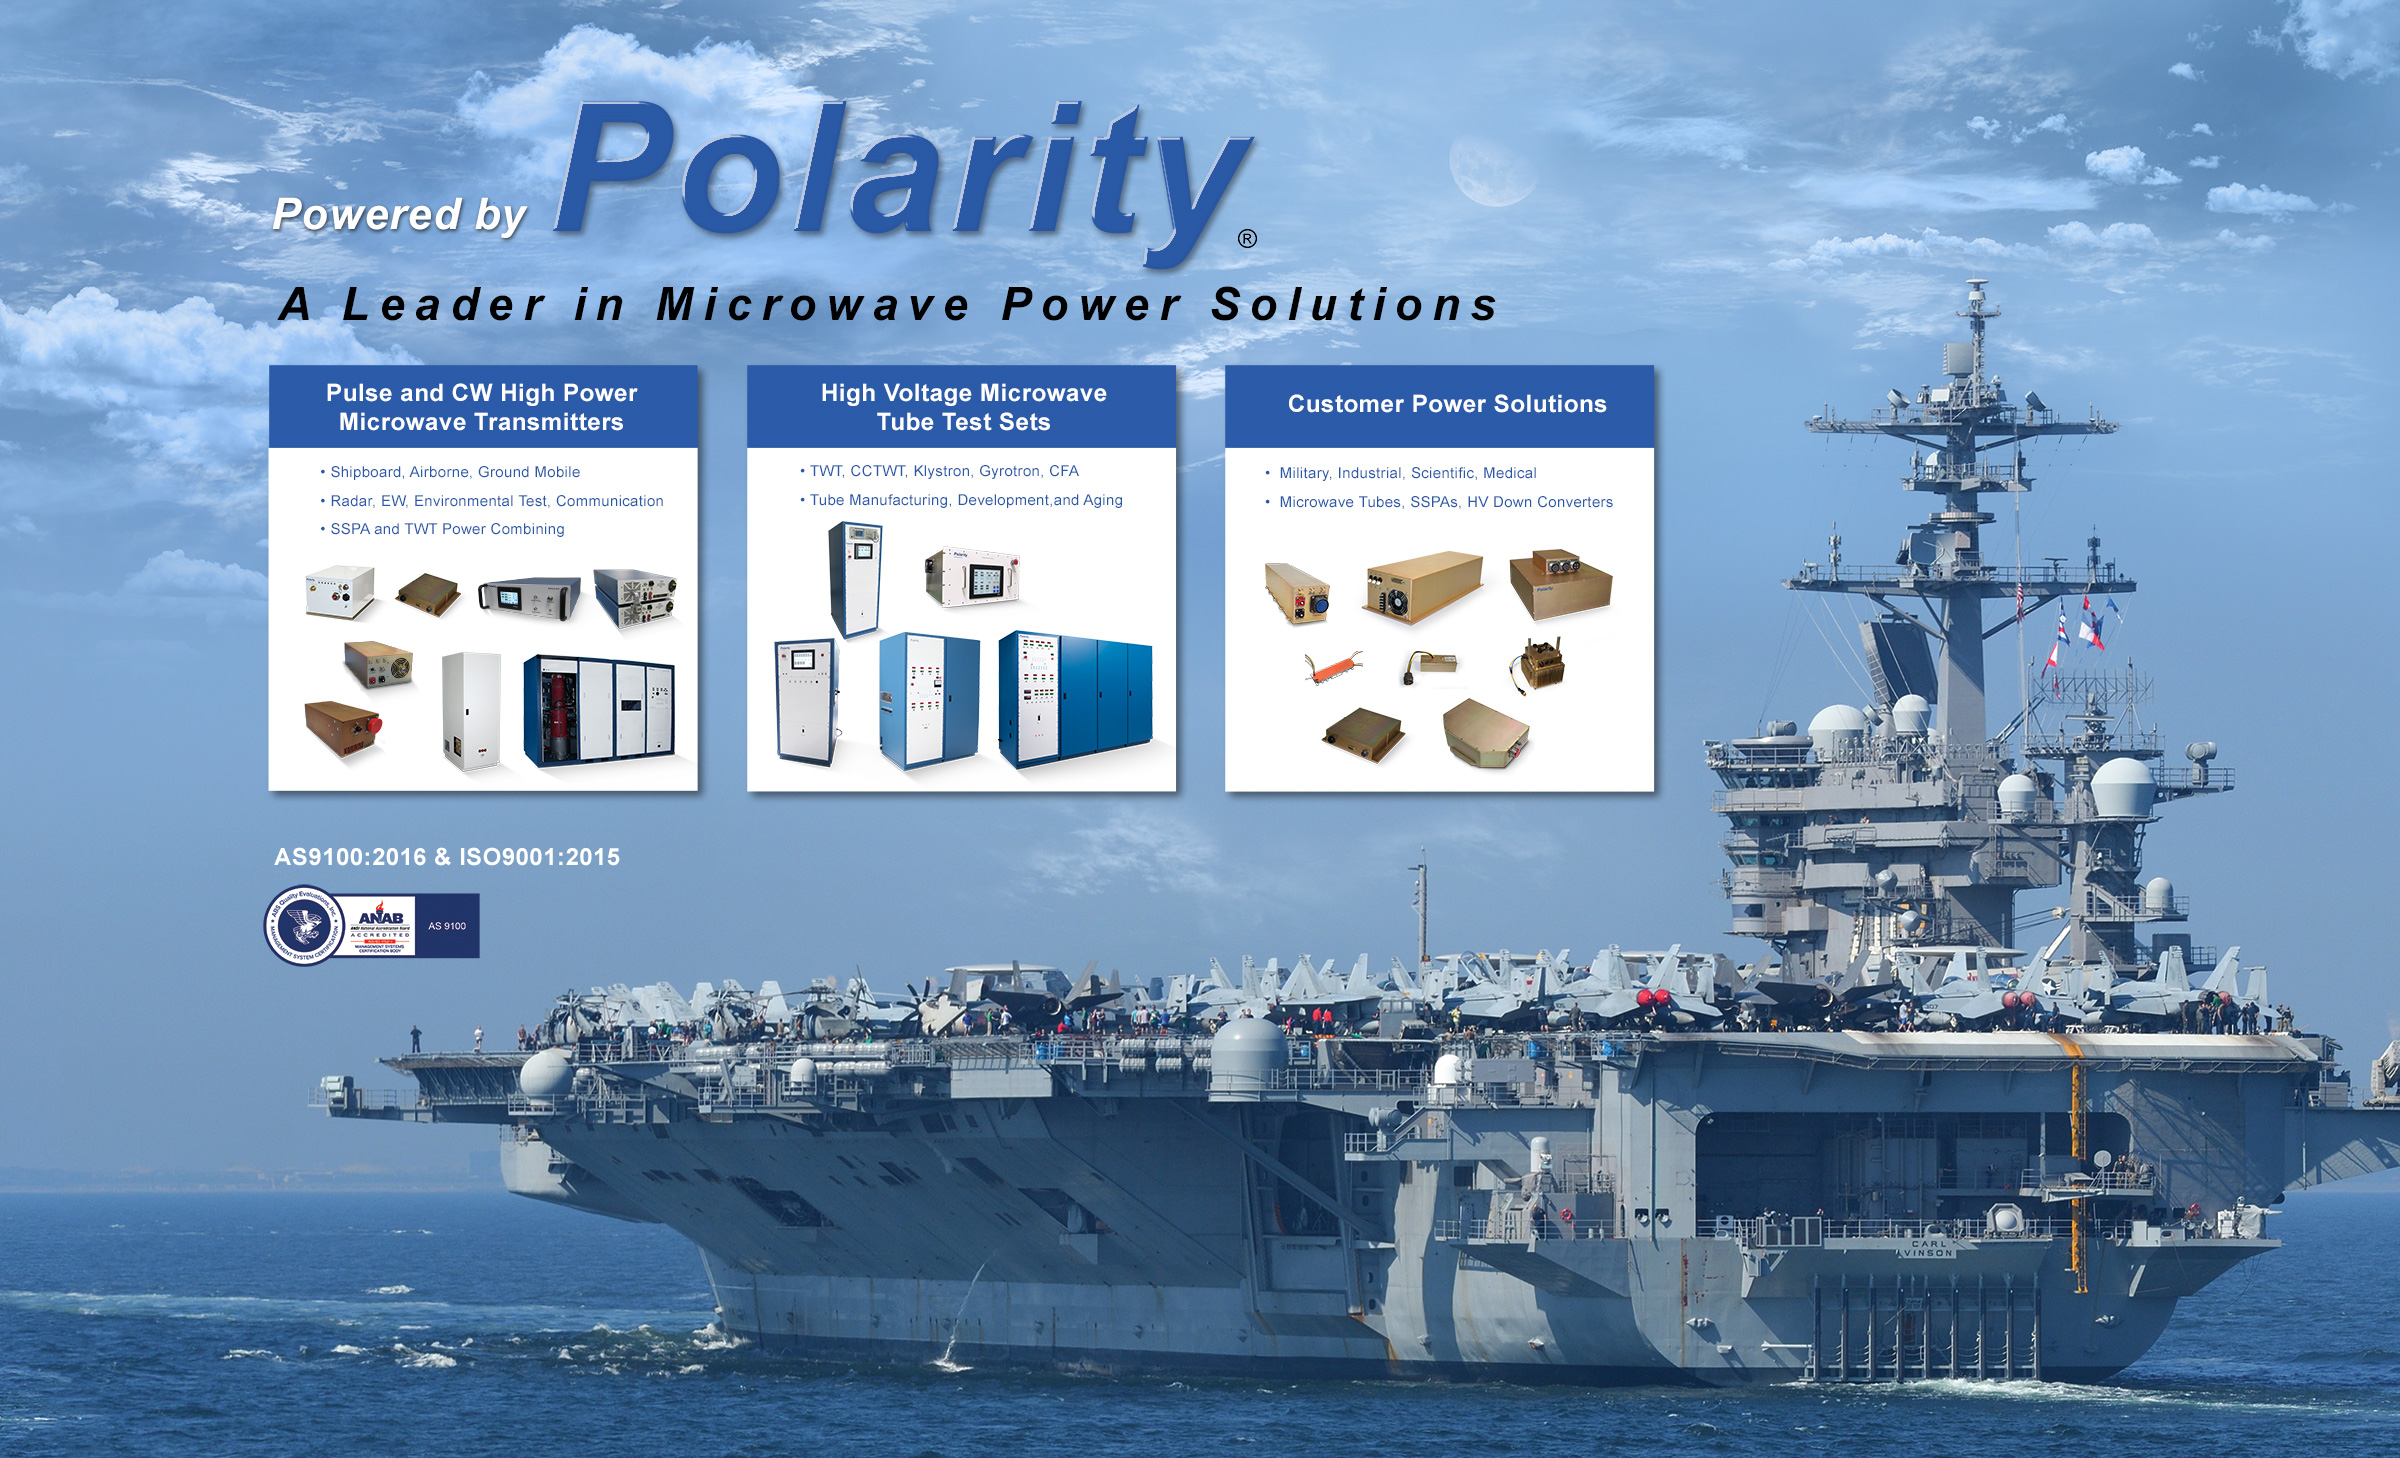 Polarity - a Leader in Microwave Power Solutions